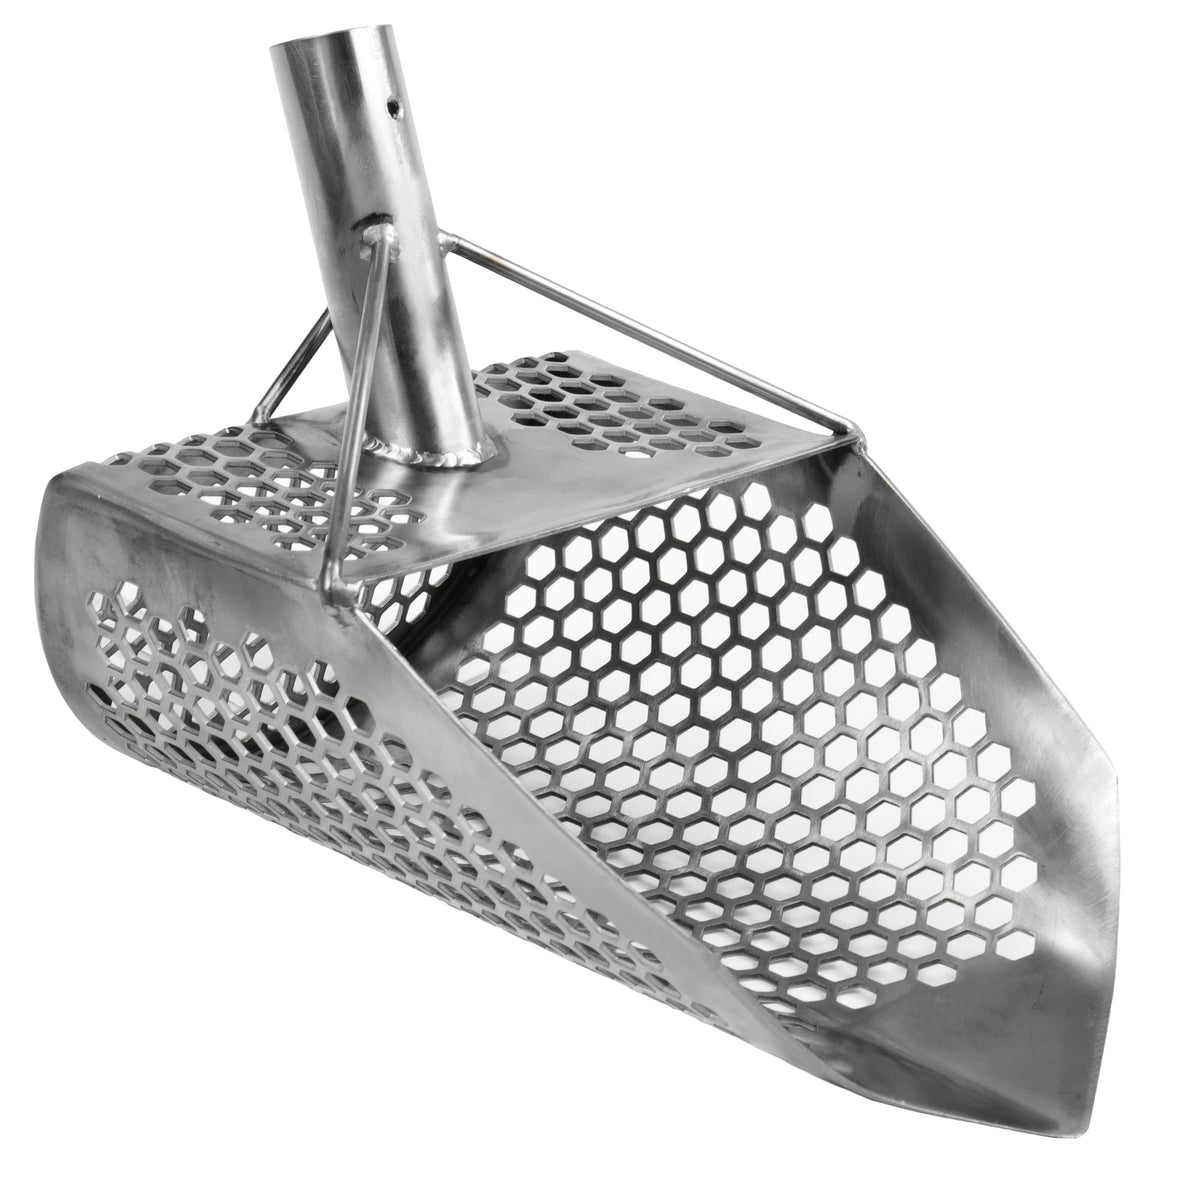 Dune Scoops Orca 11.5 x 8 Stainless Steel Sand Scoop with 10 mm Holes & Pointed Tip